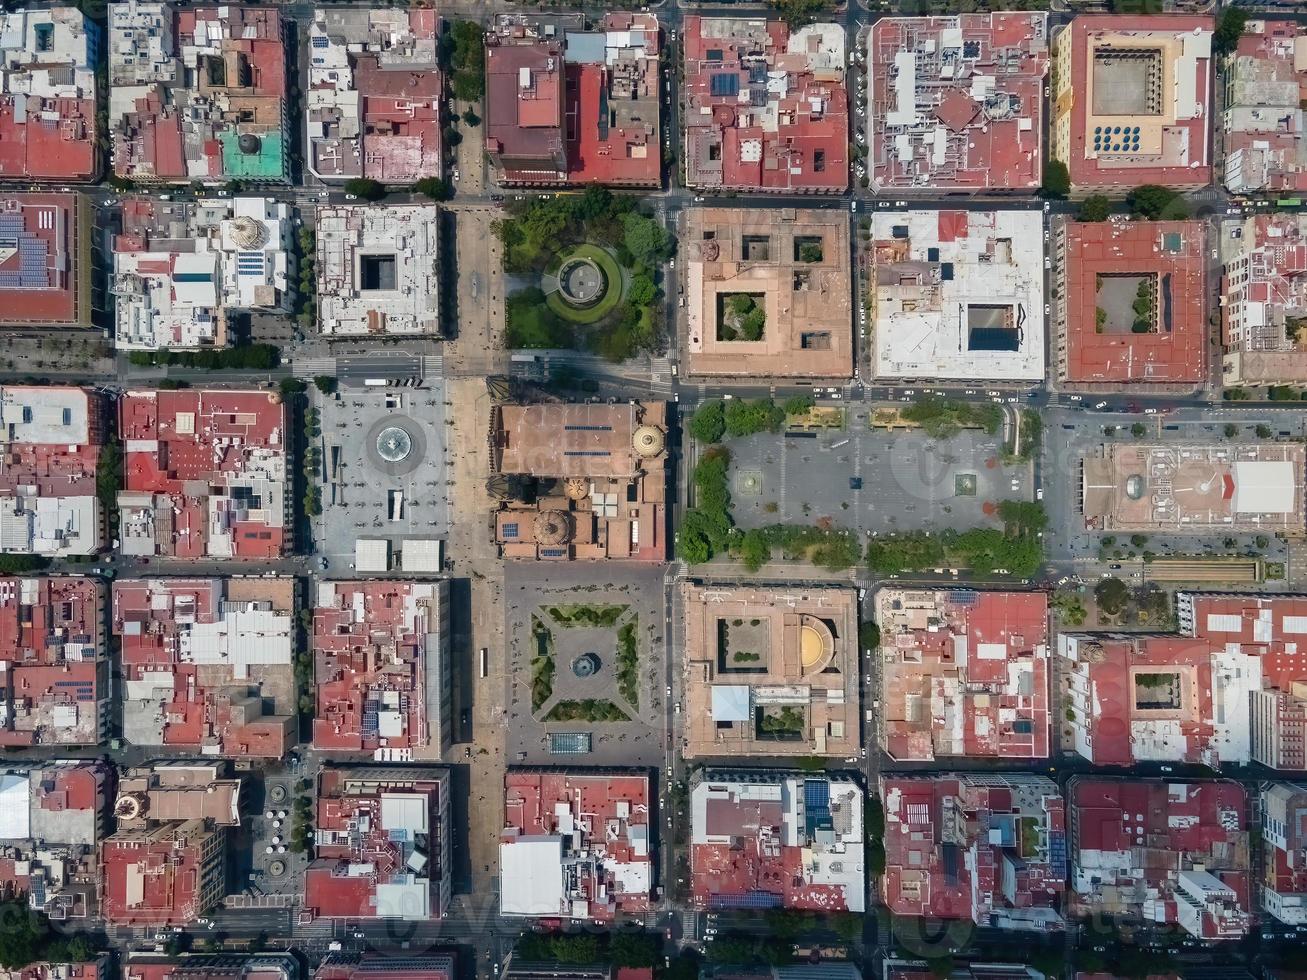 view from the sky, view from above the cross of squares in guadalajara mexico, public squares forming a cross in plan photo